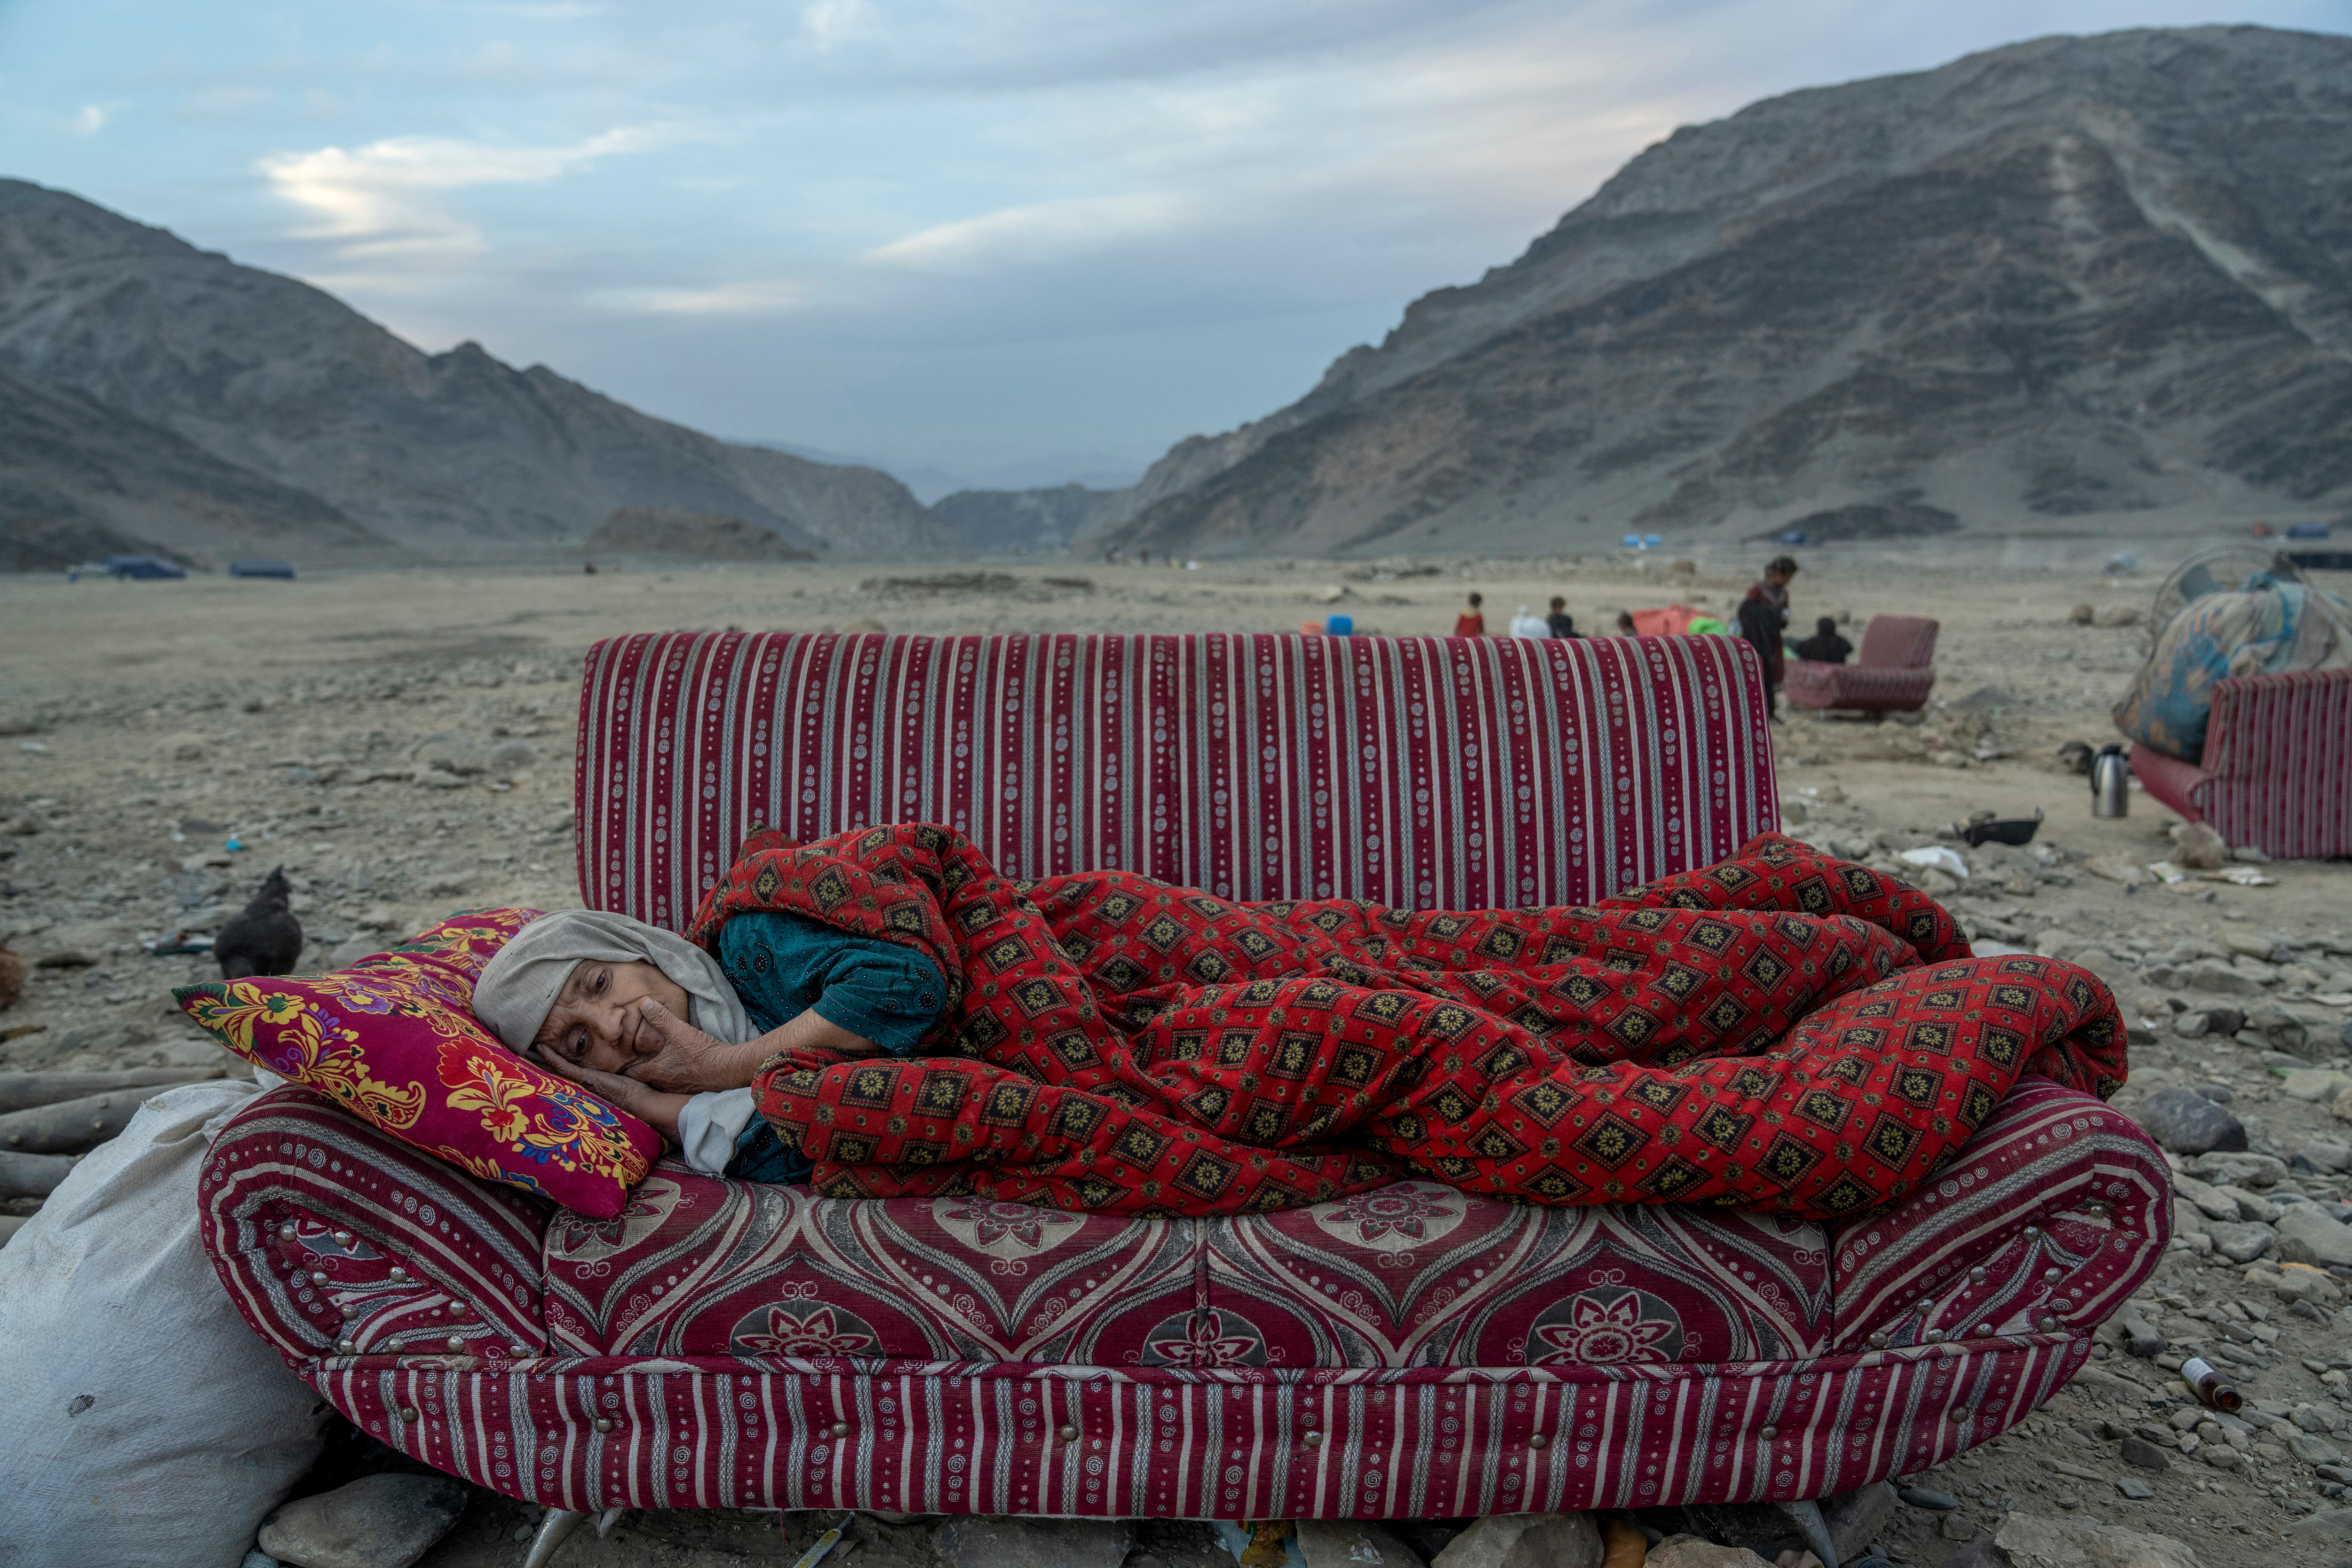 A woman rests on a couch which is outside on the ground, with desert mountains behind her